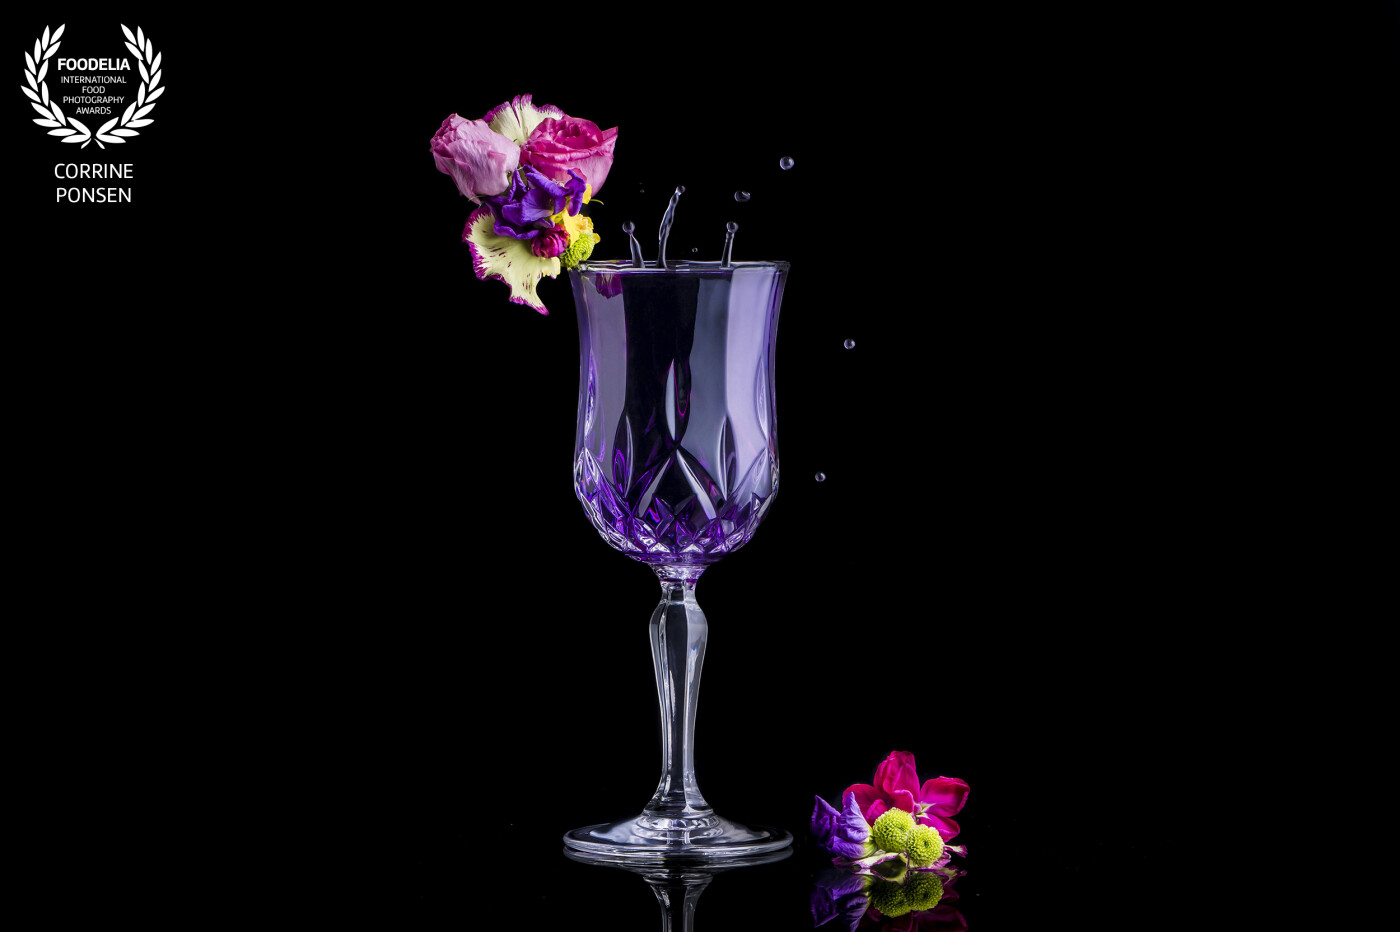 I take this picture of a crystal glass for a company who sells the most beautiful wine and whiskeyglasses.<br />
I shot this wineglas with a purple drink because the glas is also used for cocktails. I styled the flowers and with just a little splash there is some movement in the picture.